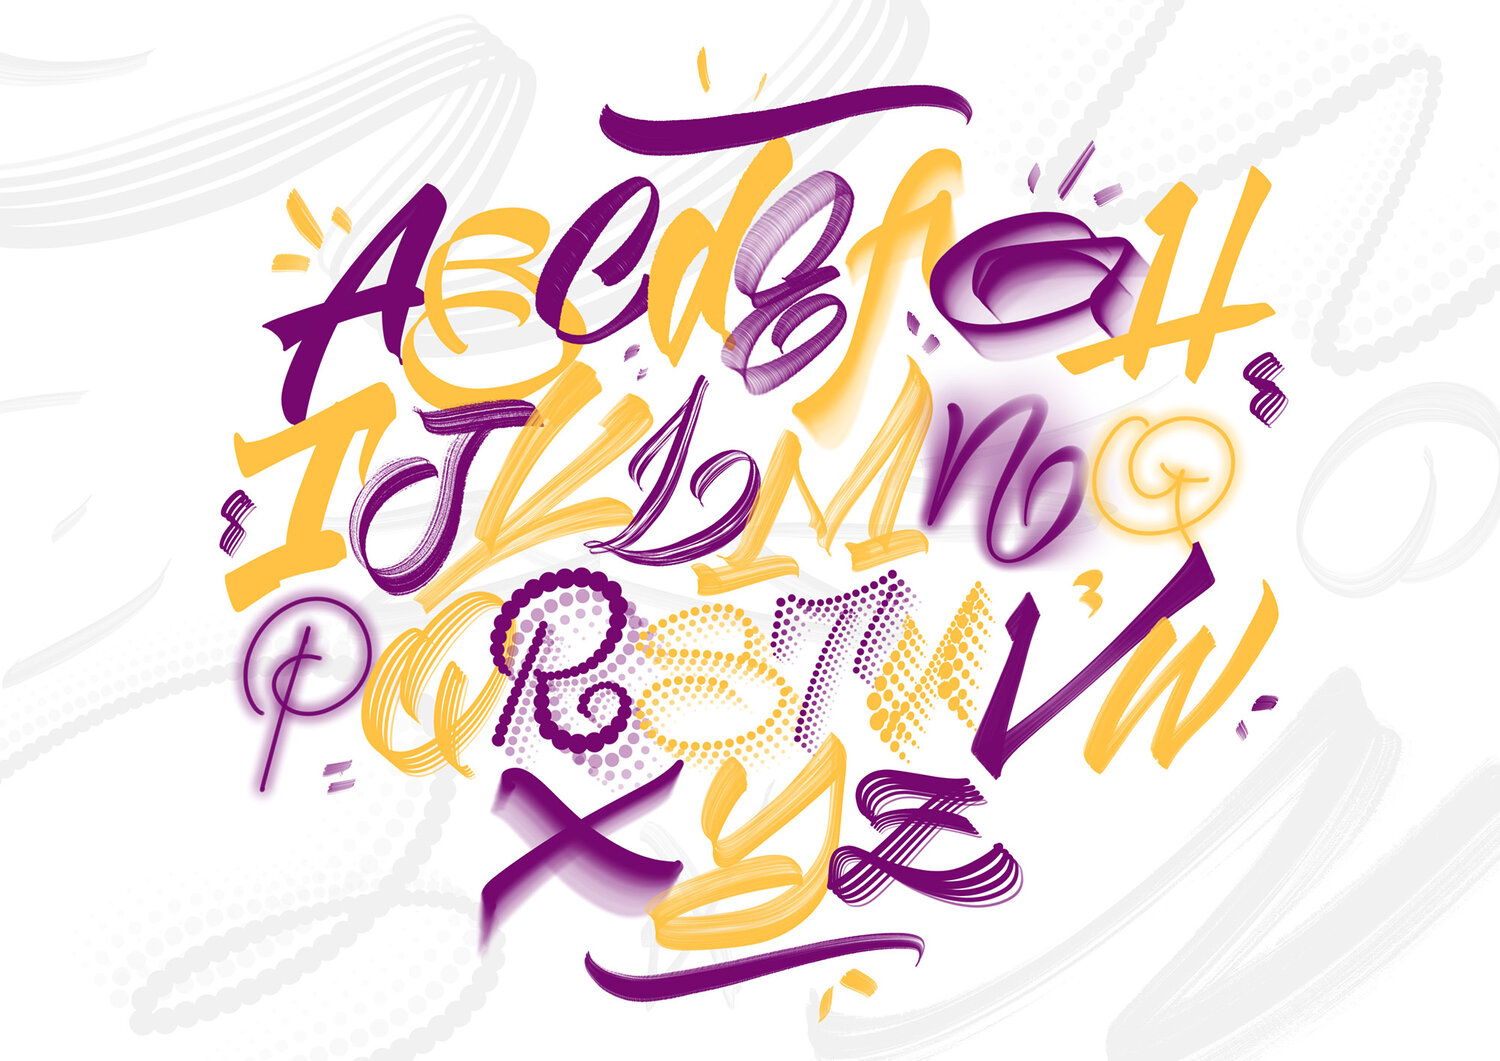 The Ultimate Lettering and Calligraphy Procreate Kit